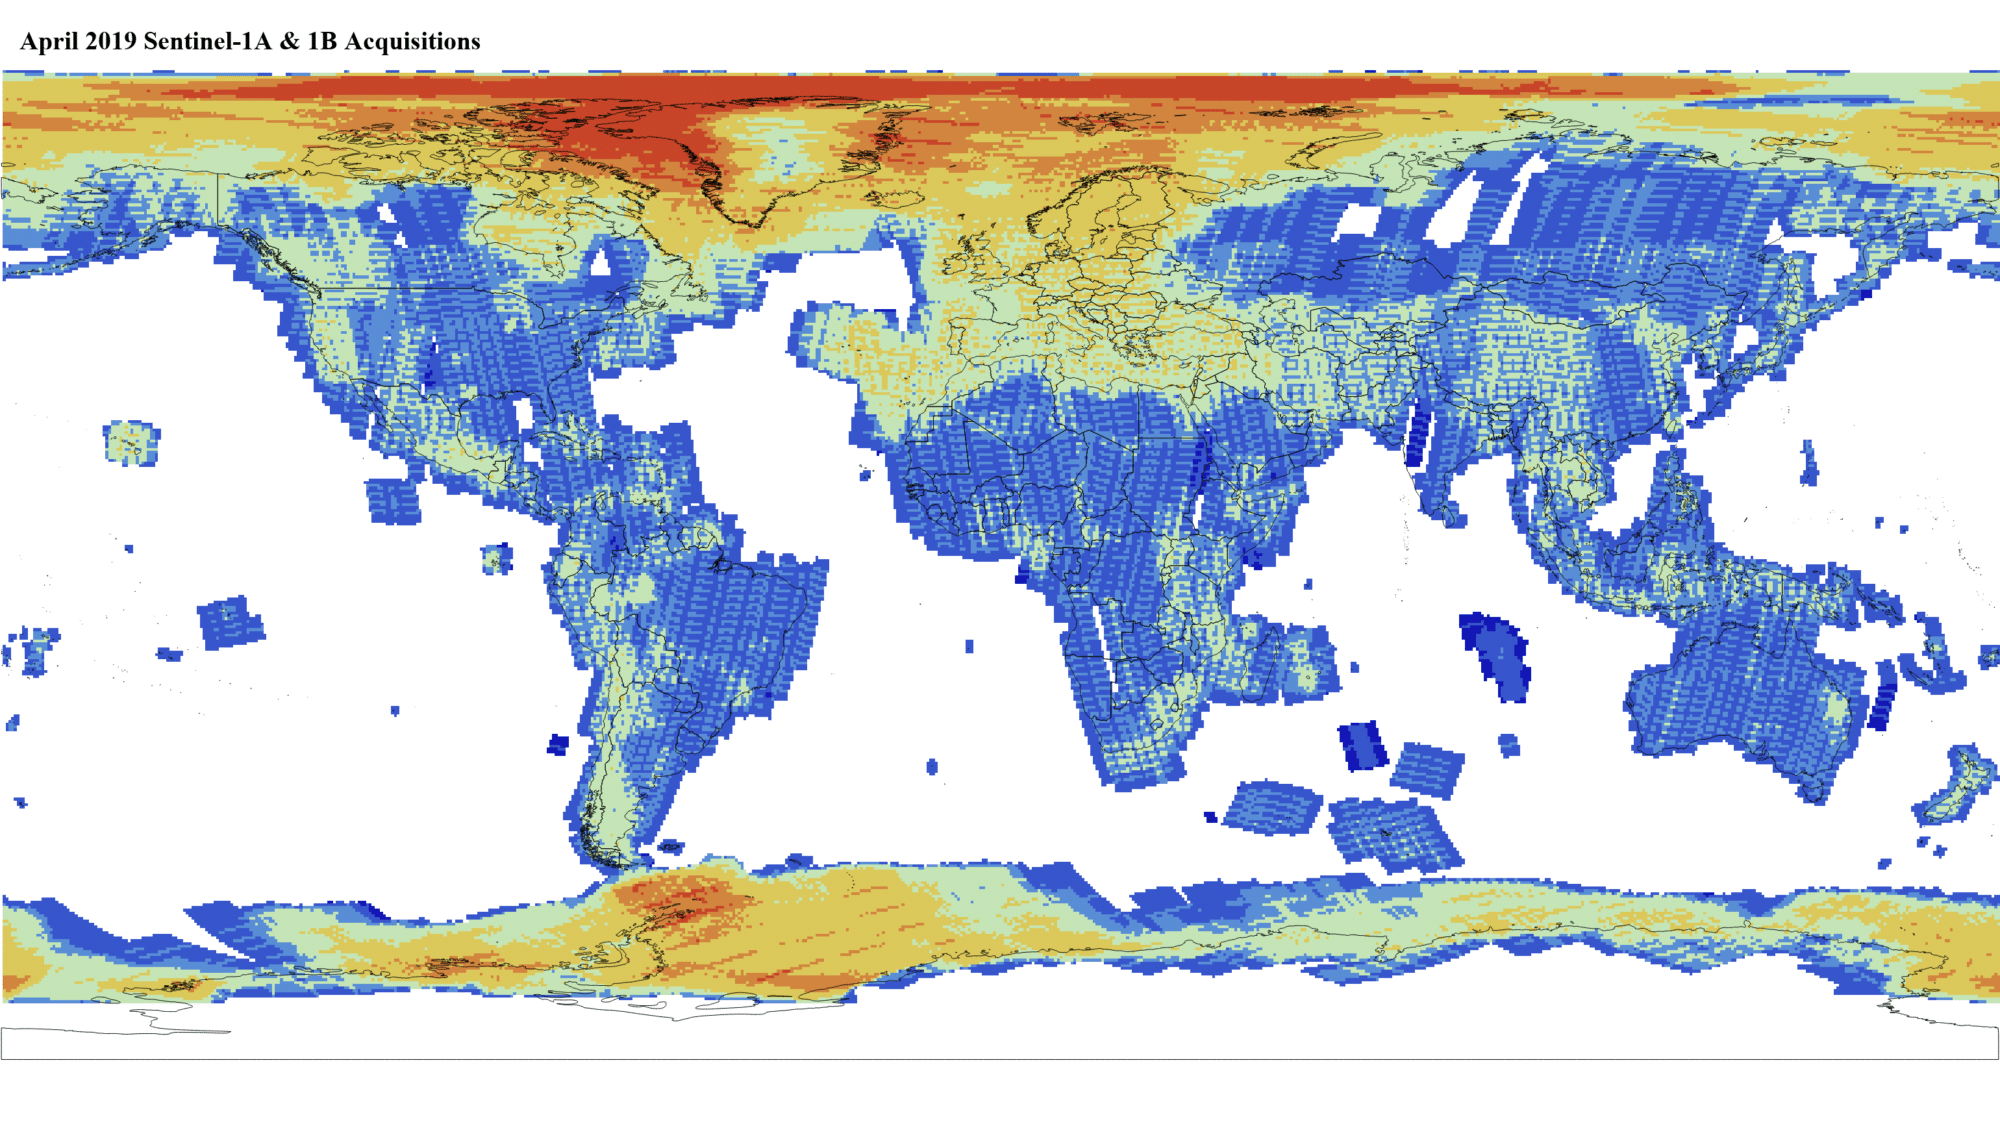 Heat map of Sentinel-1A and -1B GRD global acquisitions April 2019